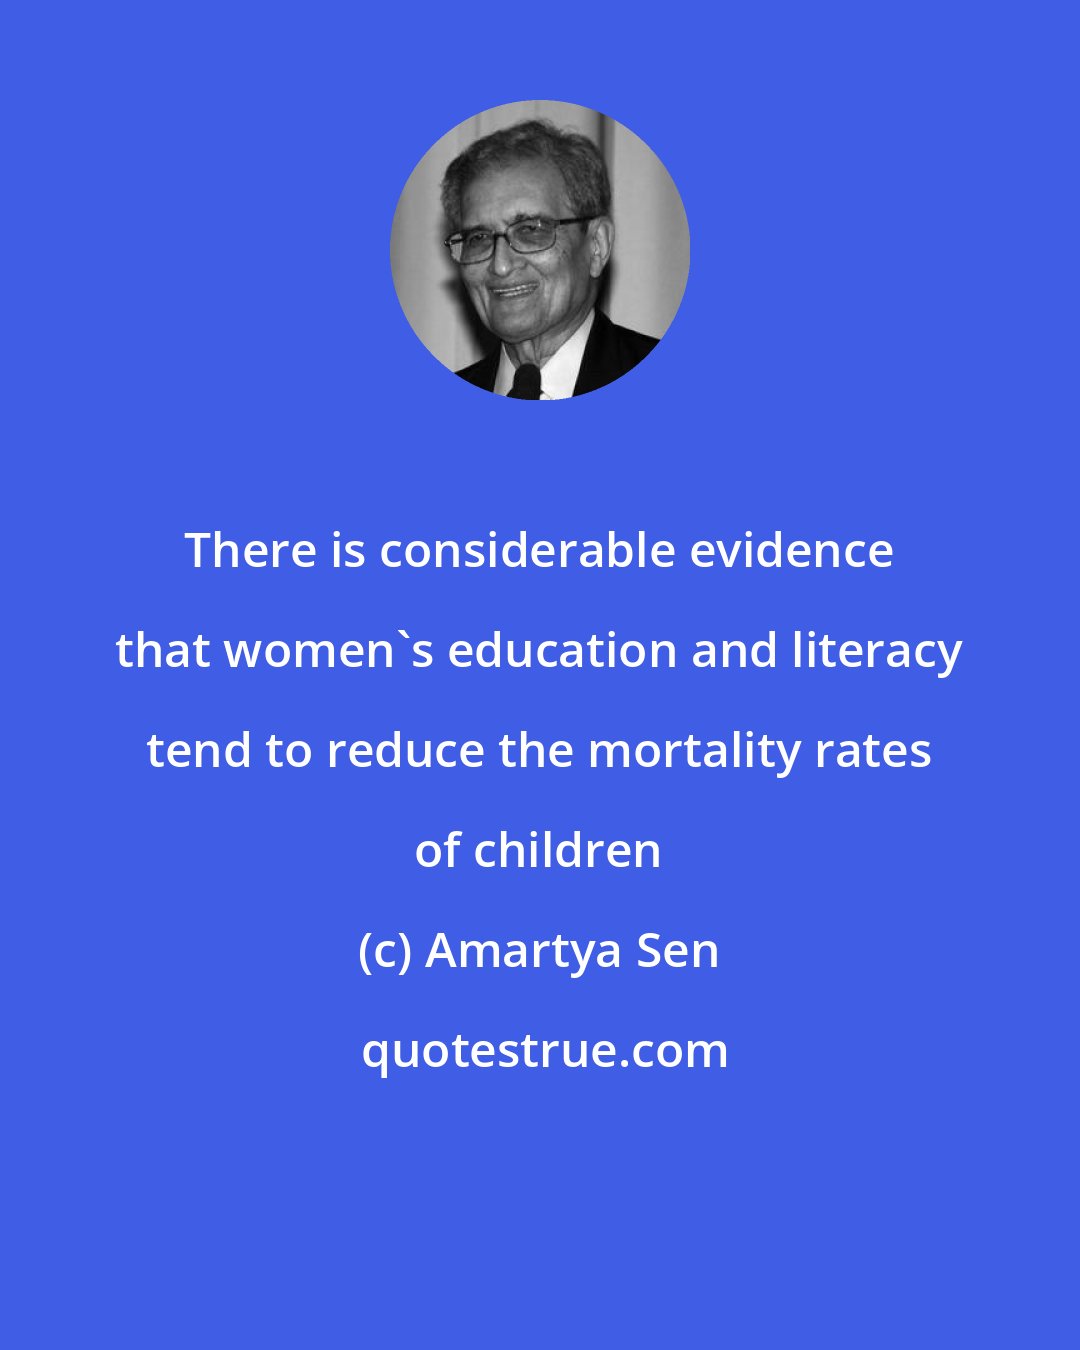 Amartya Sen: There is considerable evidence that women's education and literacy tend to reduce the mortality rates of children